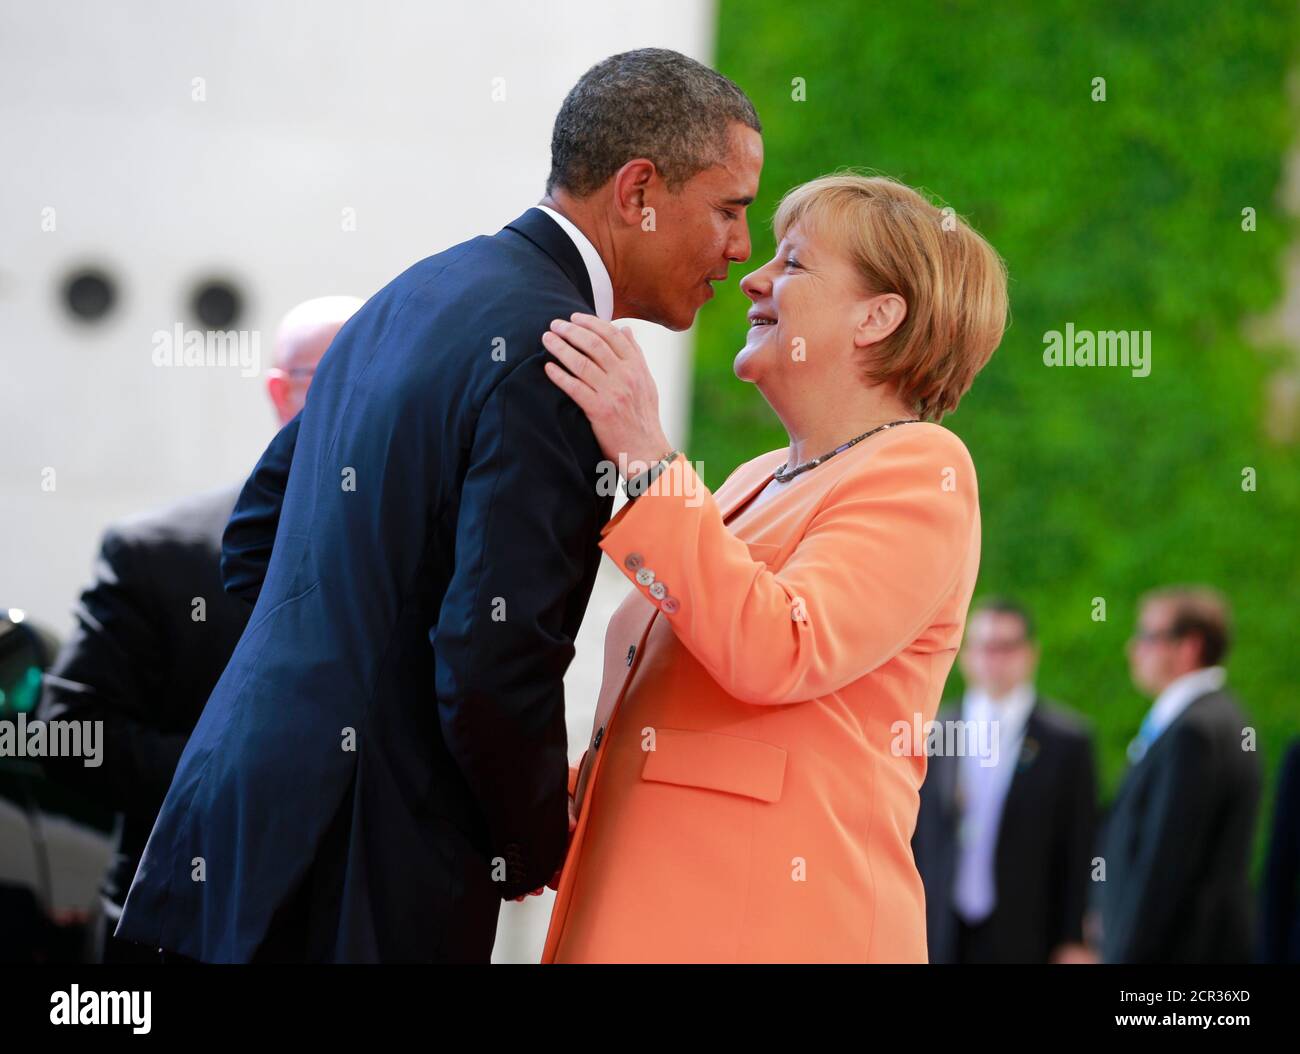 U.S. President Barack Obama embraces German Chancellor Angela Merkel outside the Chancellery in Berlin, June 19, 2013. Obama will unveil plans for a sharp reduction in nuclear warheads in a landmark speech at the Brandenburg Gate on Wednesday that comes 50 years after John F. Kennedy declared 'Ich bin ein Berliner' in a defiant Cold War address.    REUTERS/Thomas Peter (GERMANY  - Tags: POLITICS) Stock Photo